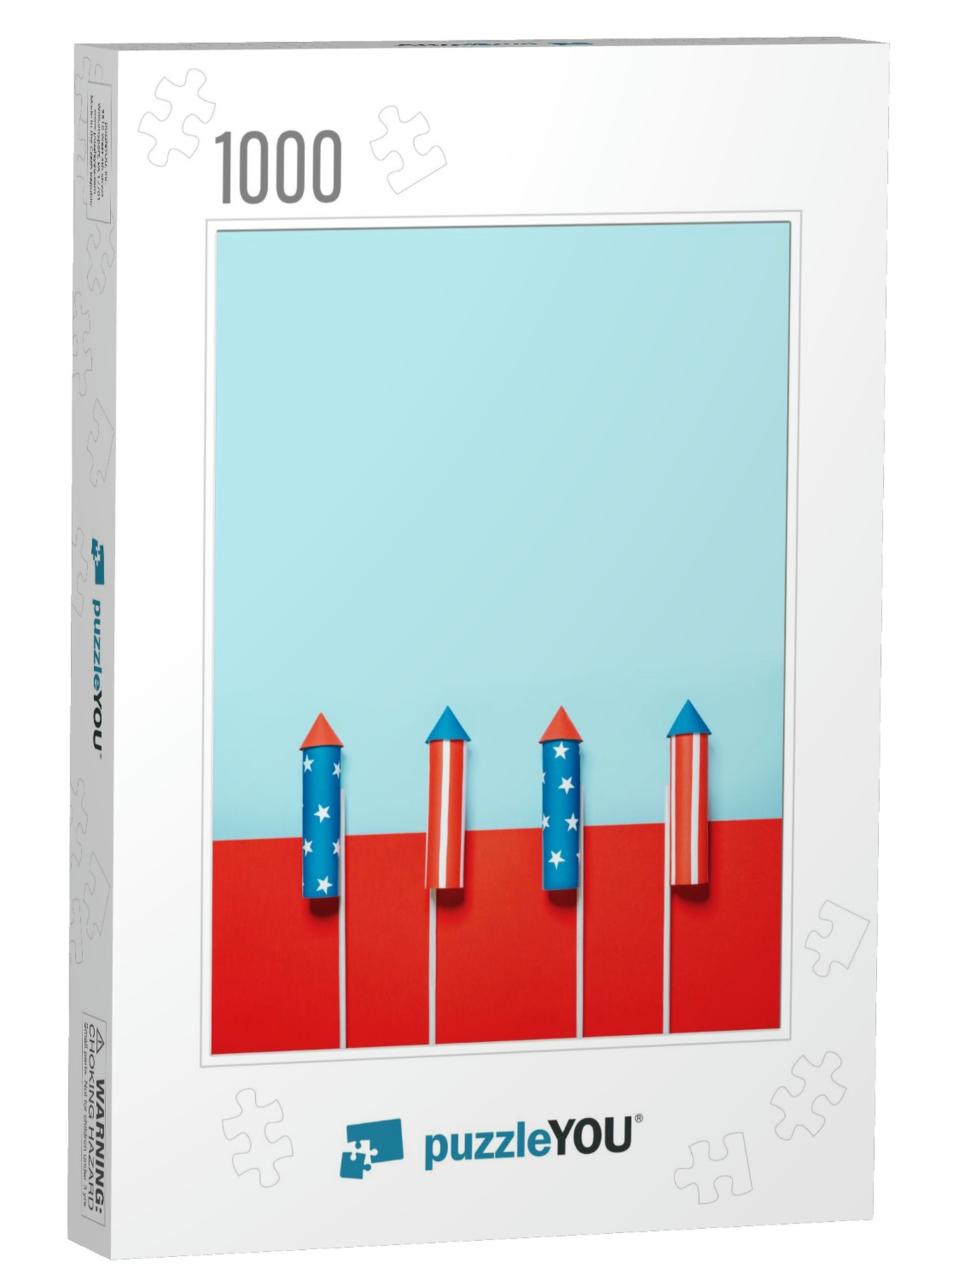 July 4, Rockets for Fireworks on a Blue Red Background... Jigsaw Puzzle with 1000 pieces